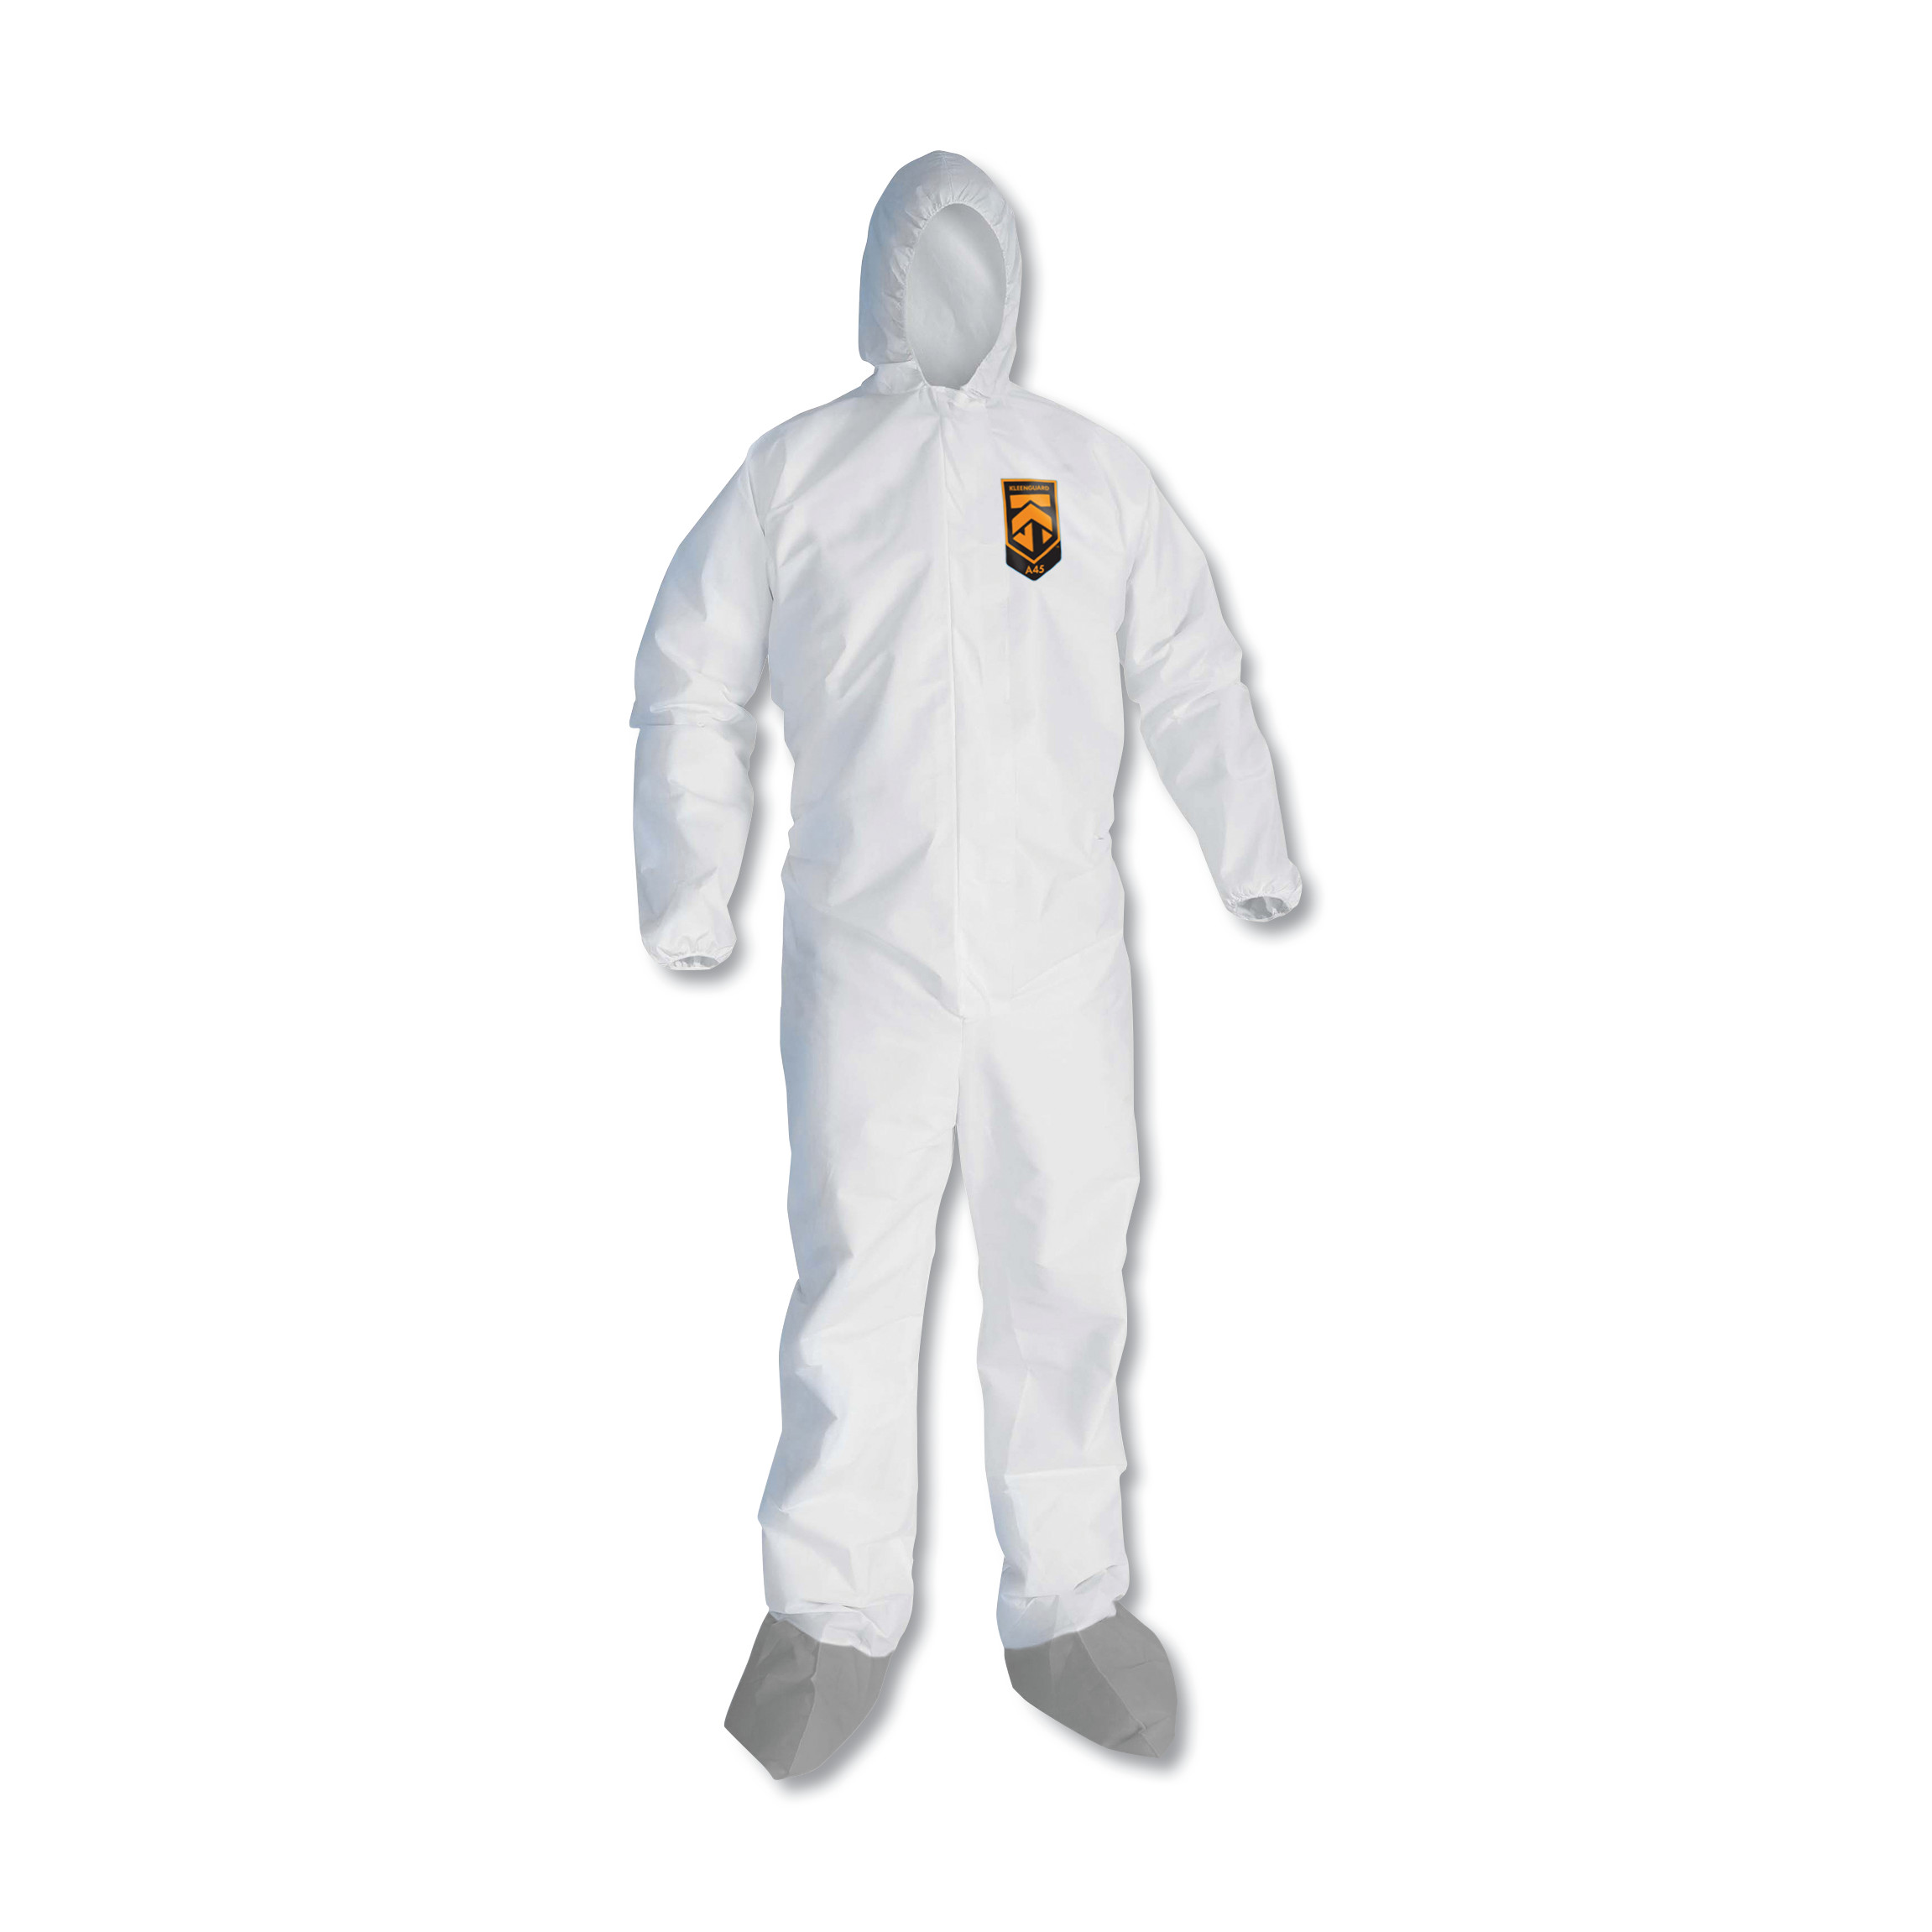  KleenGuard 48972 A45 Liquid and Particle Protection Surface Prep/Paint Coveralls, Medium, 25/CT (KCC48972) 